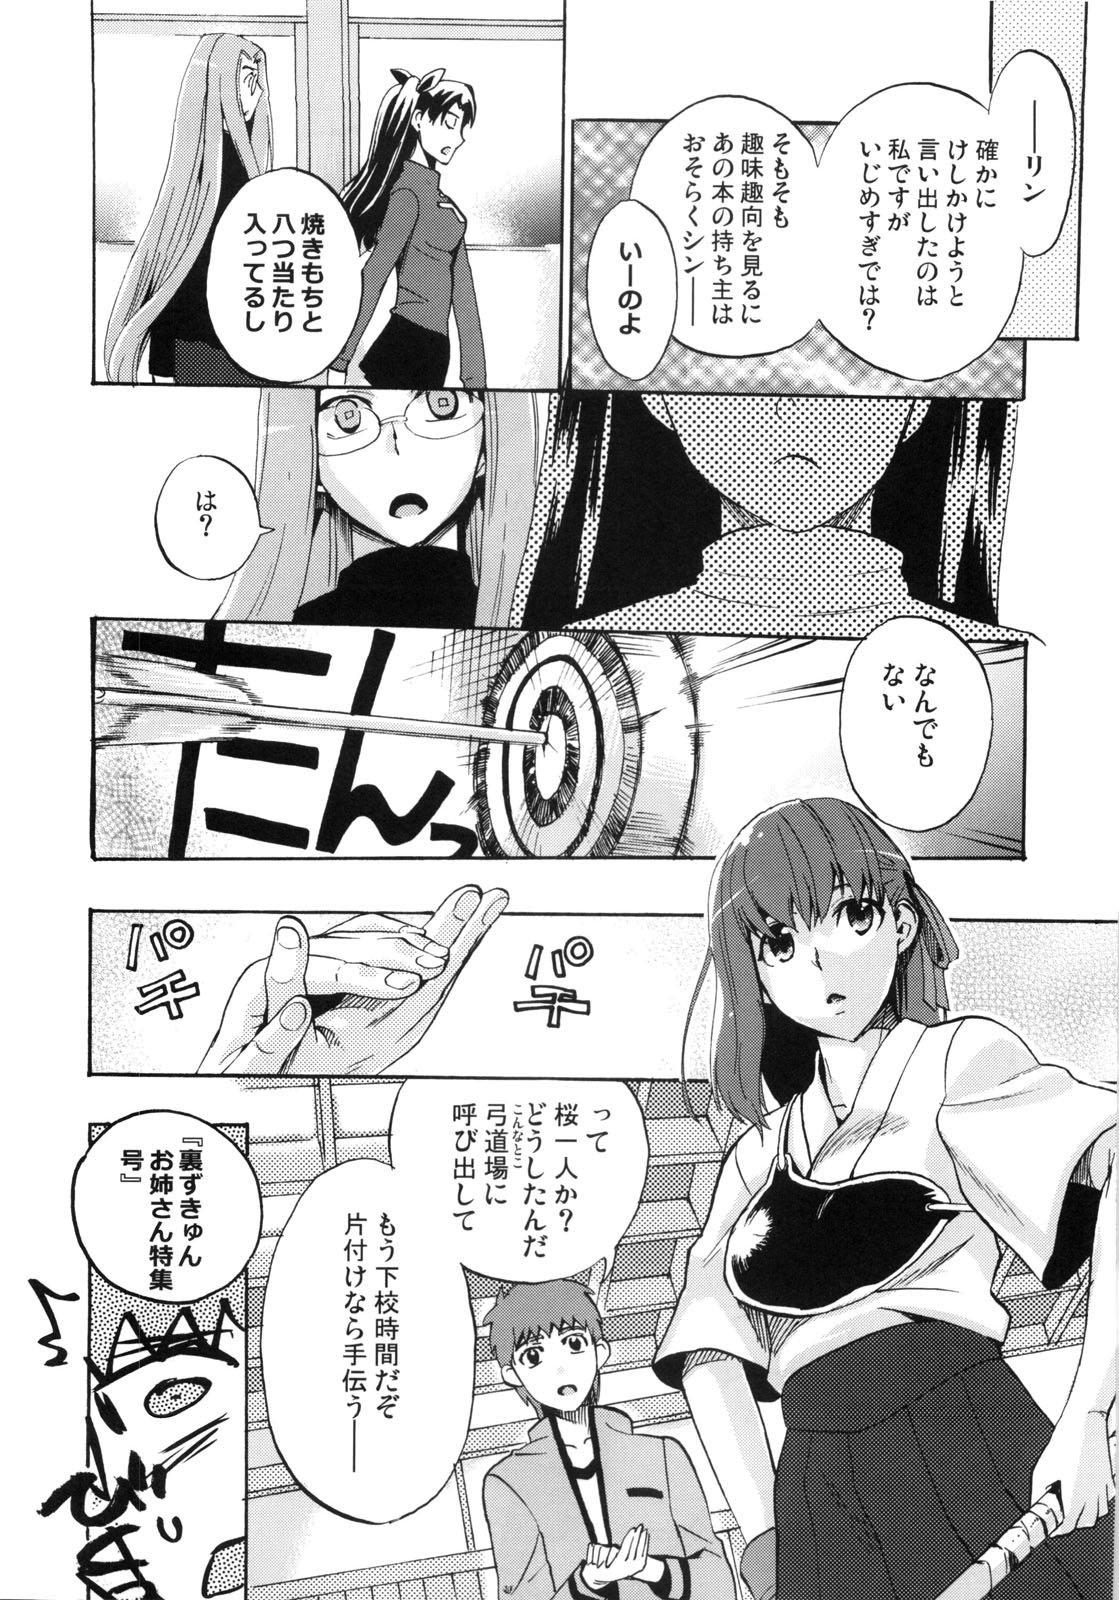 Masterbation cherry pie - Fate stay night Magrinha - Page 5